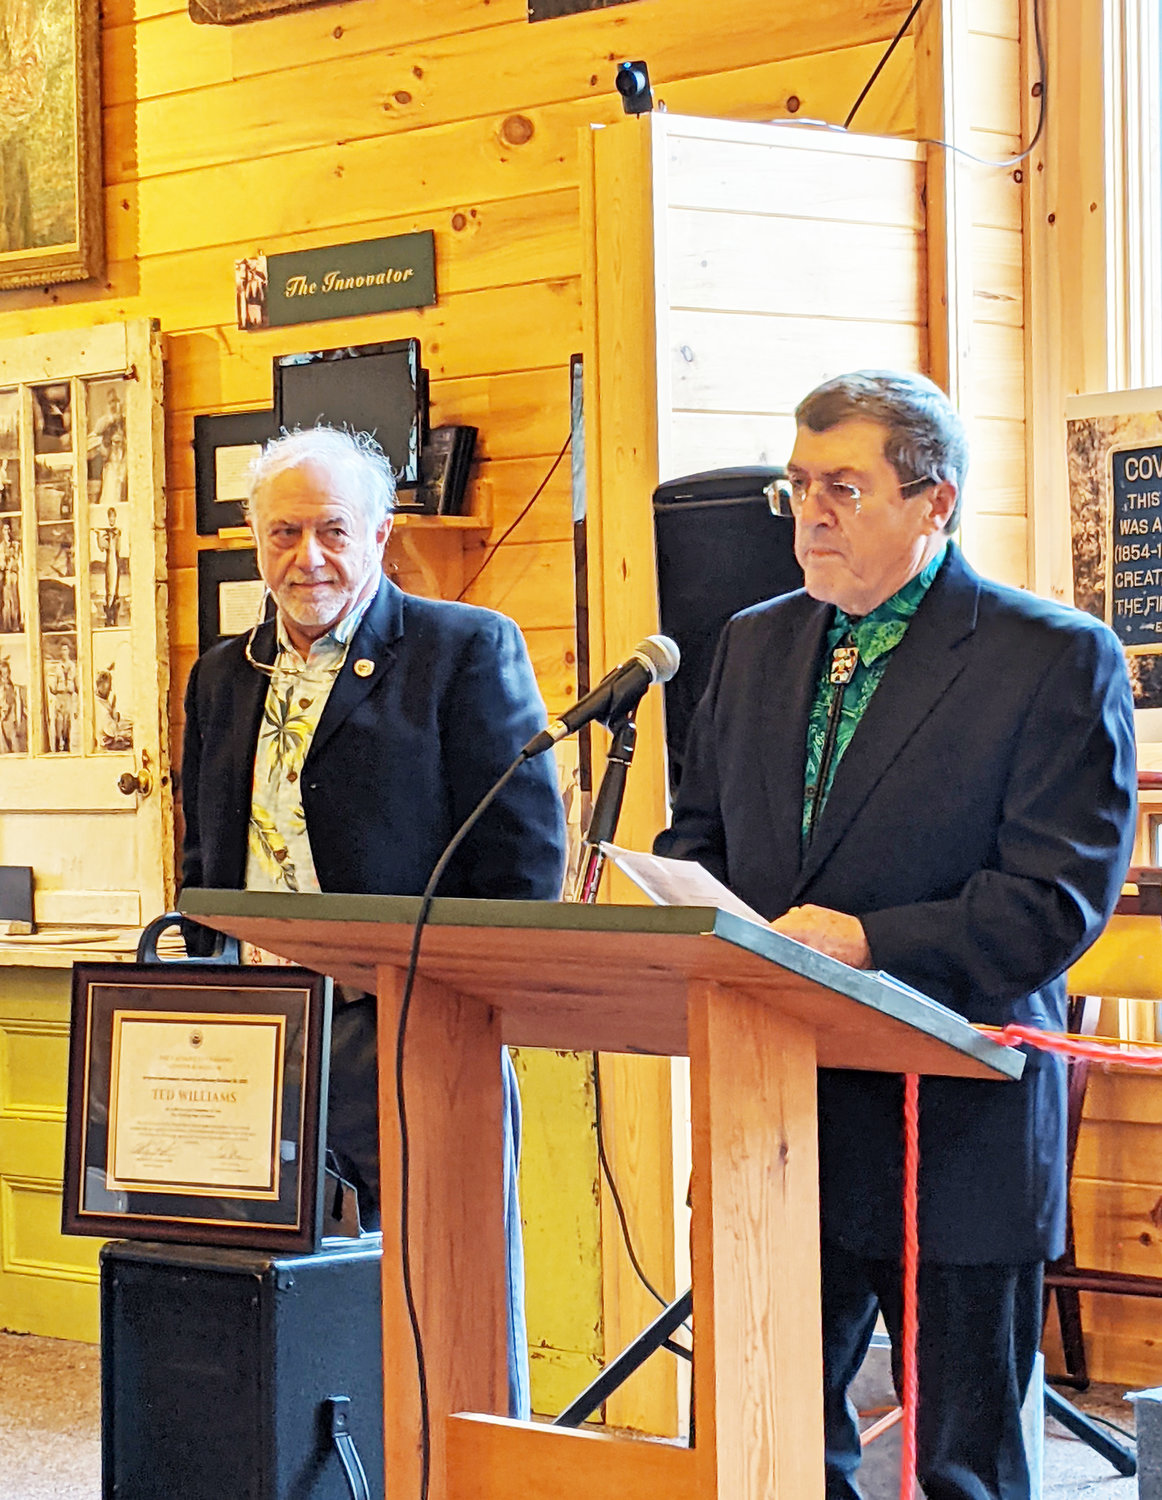 Terry Schultz (at mic) shares information about 2021 Hall of Fame inductee Ted Williams at the Catskill Fly Fishing Center and Museum ceremony while Ted Patlen looks on.